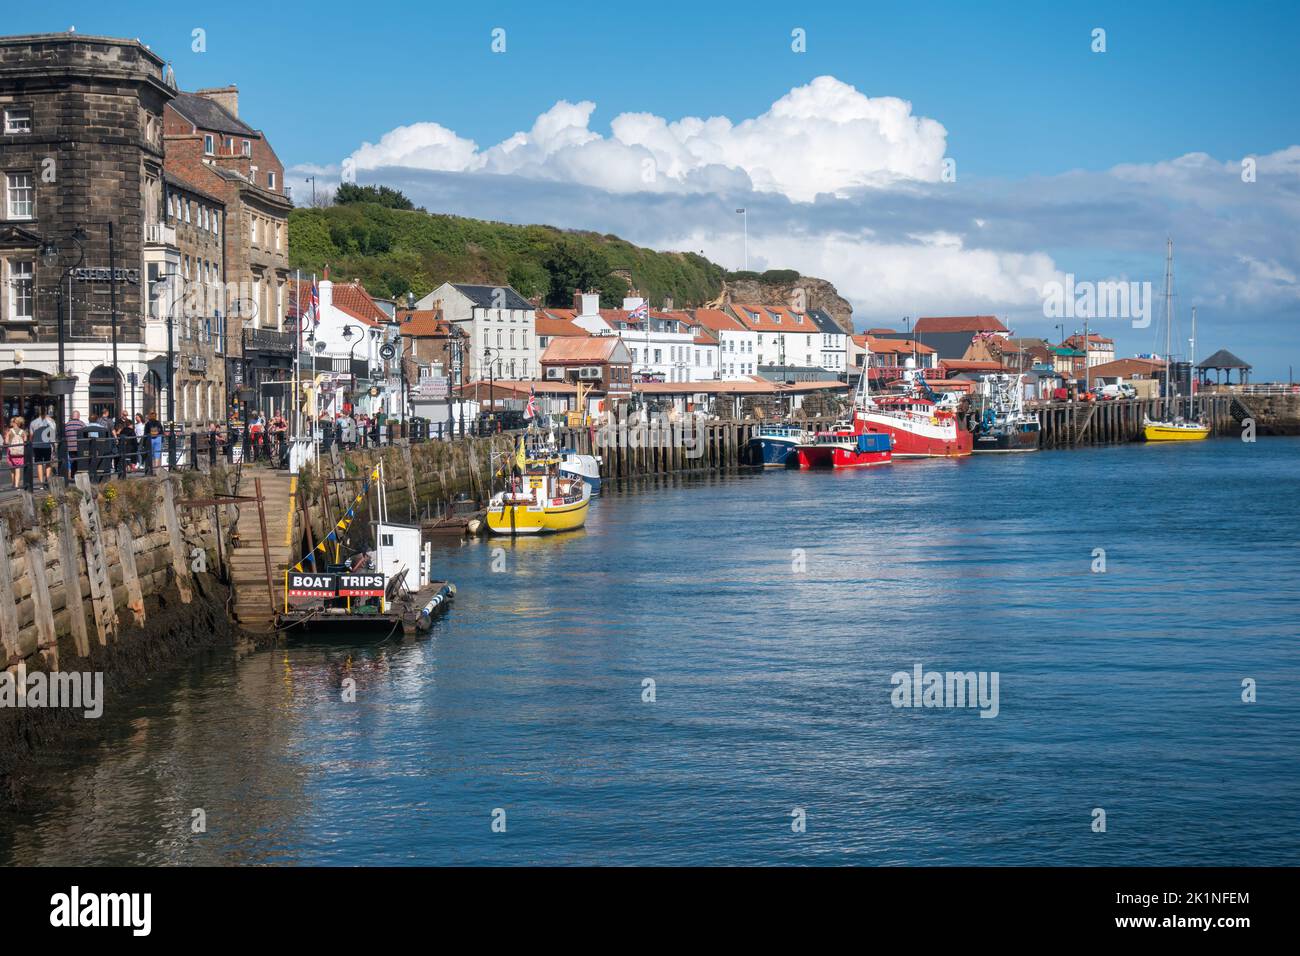 Whitby Harbour, Yorkshire du Nord, Angleterre, Royaume-Uni. Banque D'Images